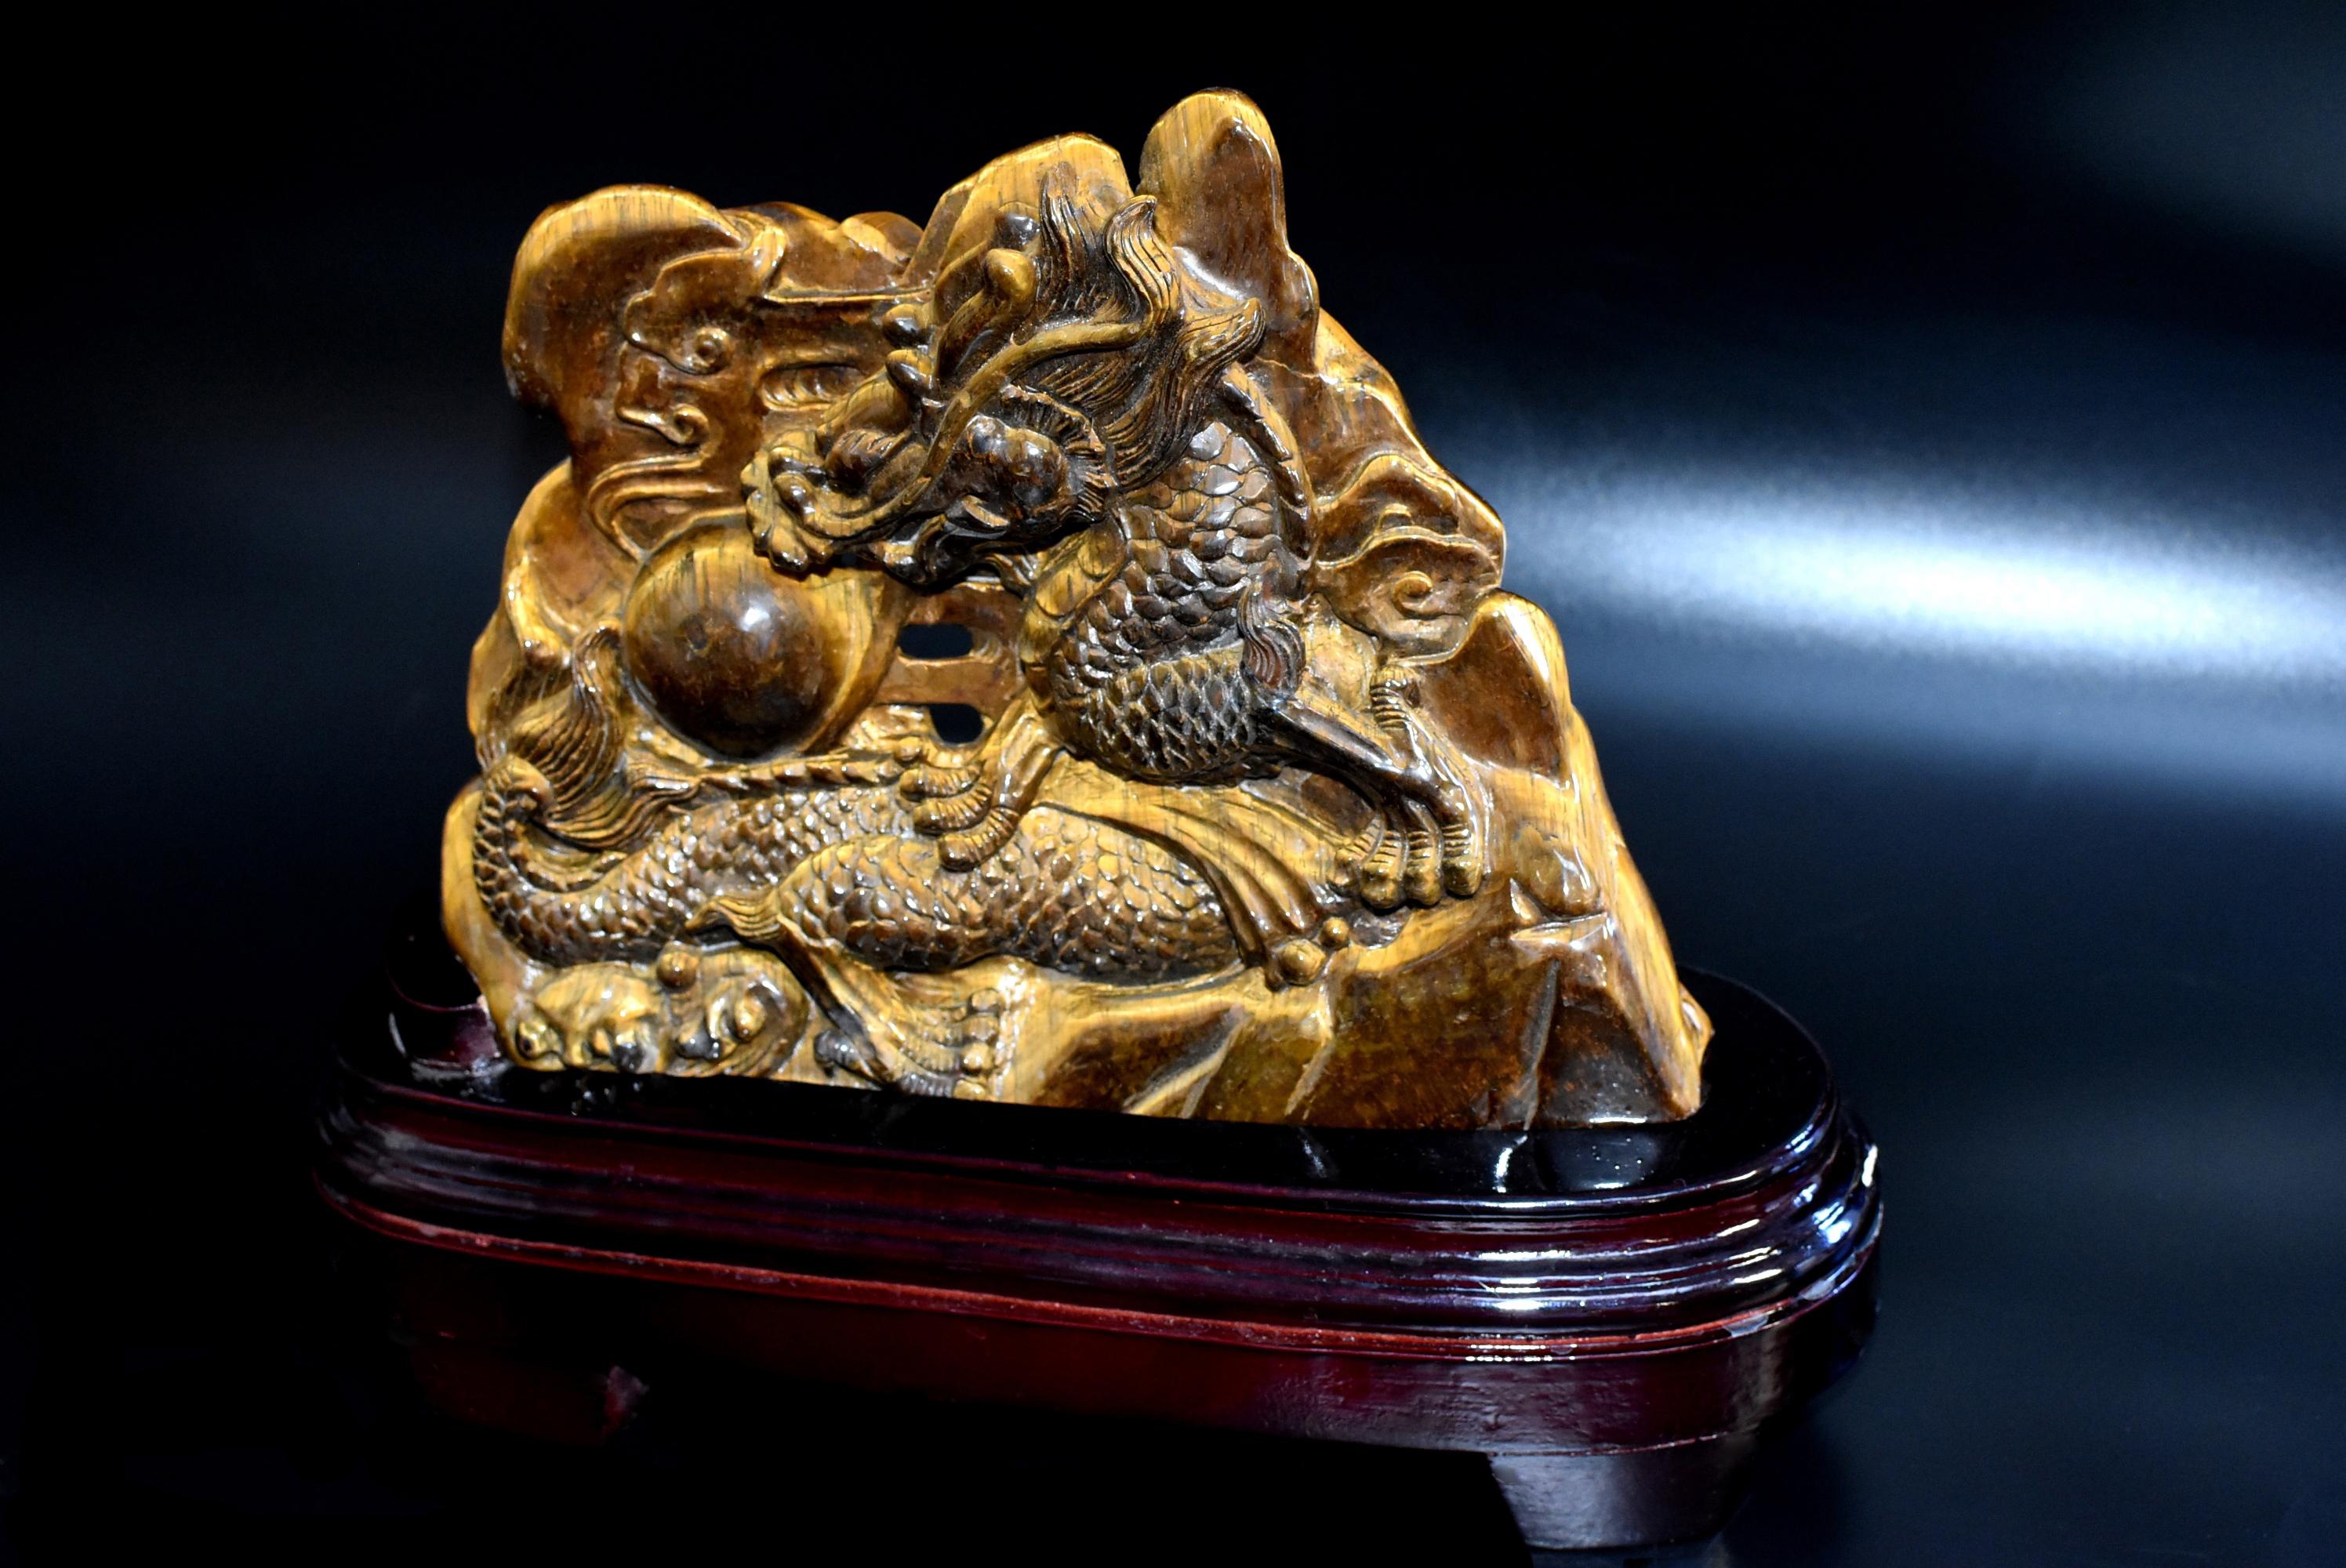 A stunning hand carved 2.2 lb tiger's eye sculpture depicting dragon chasing a pearl in the late Qing dynasty style. The four-clawed dragon under the auspicious clouds has one front talon below its subject, a flaming pearl, while the other three are